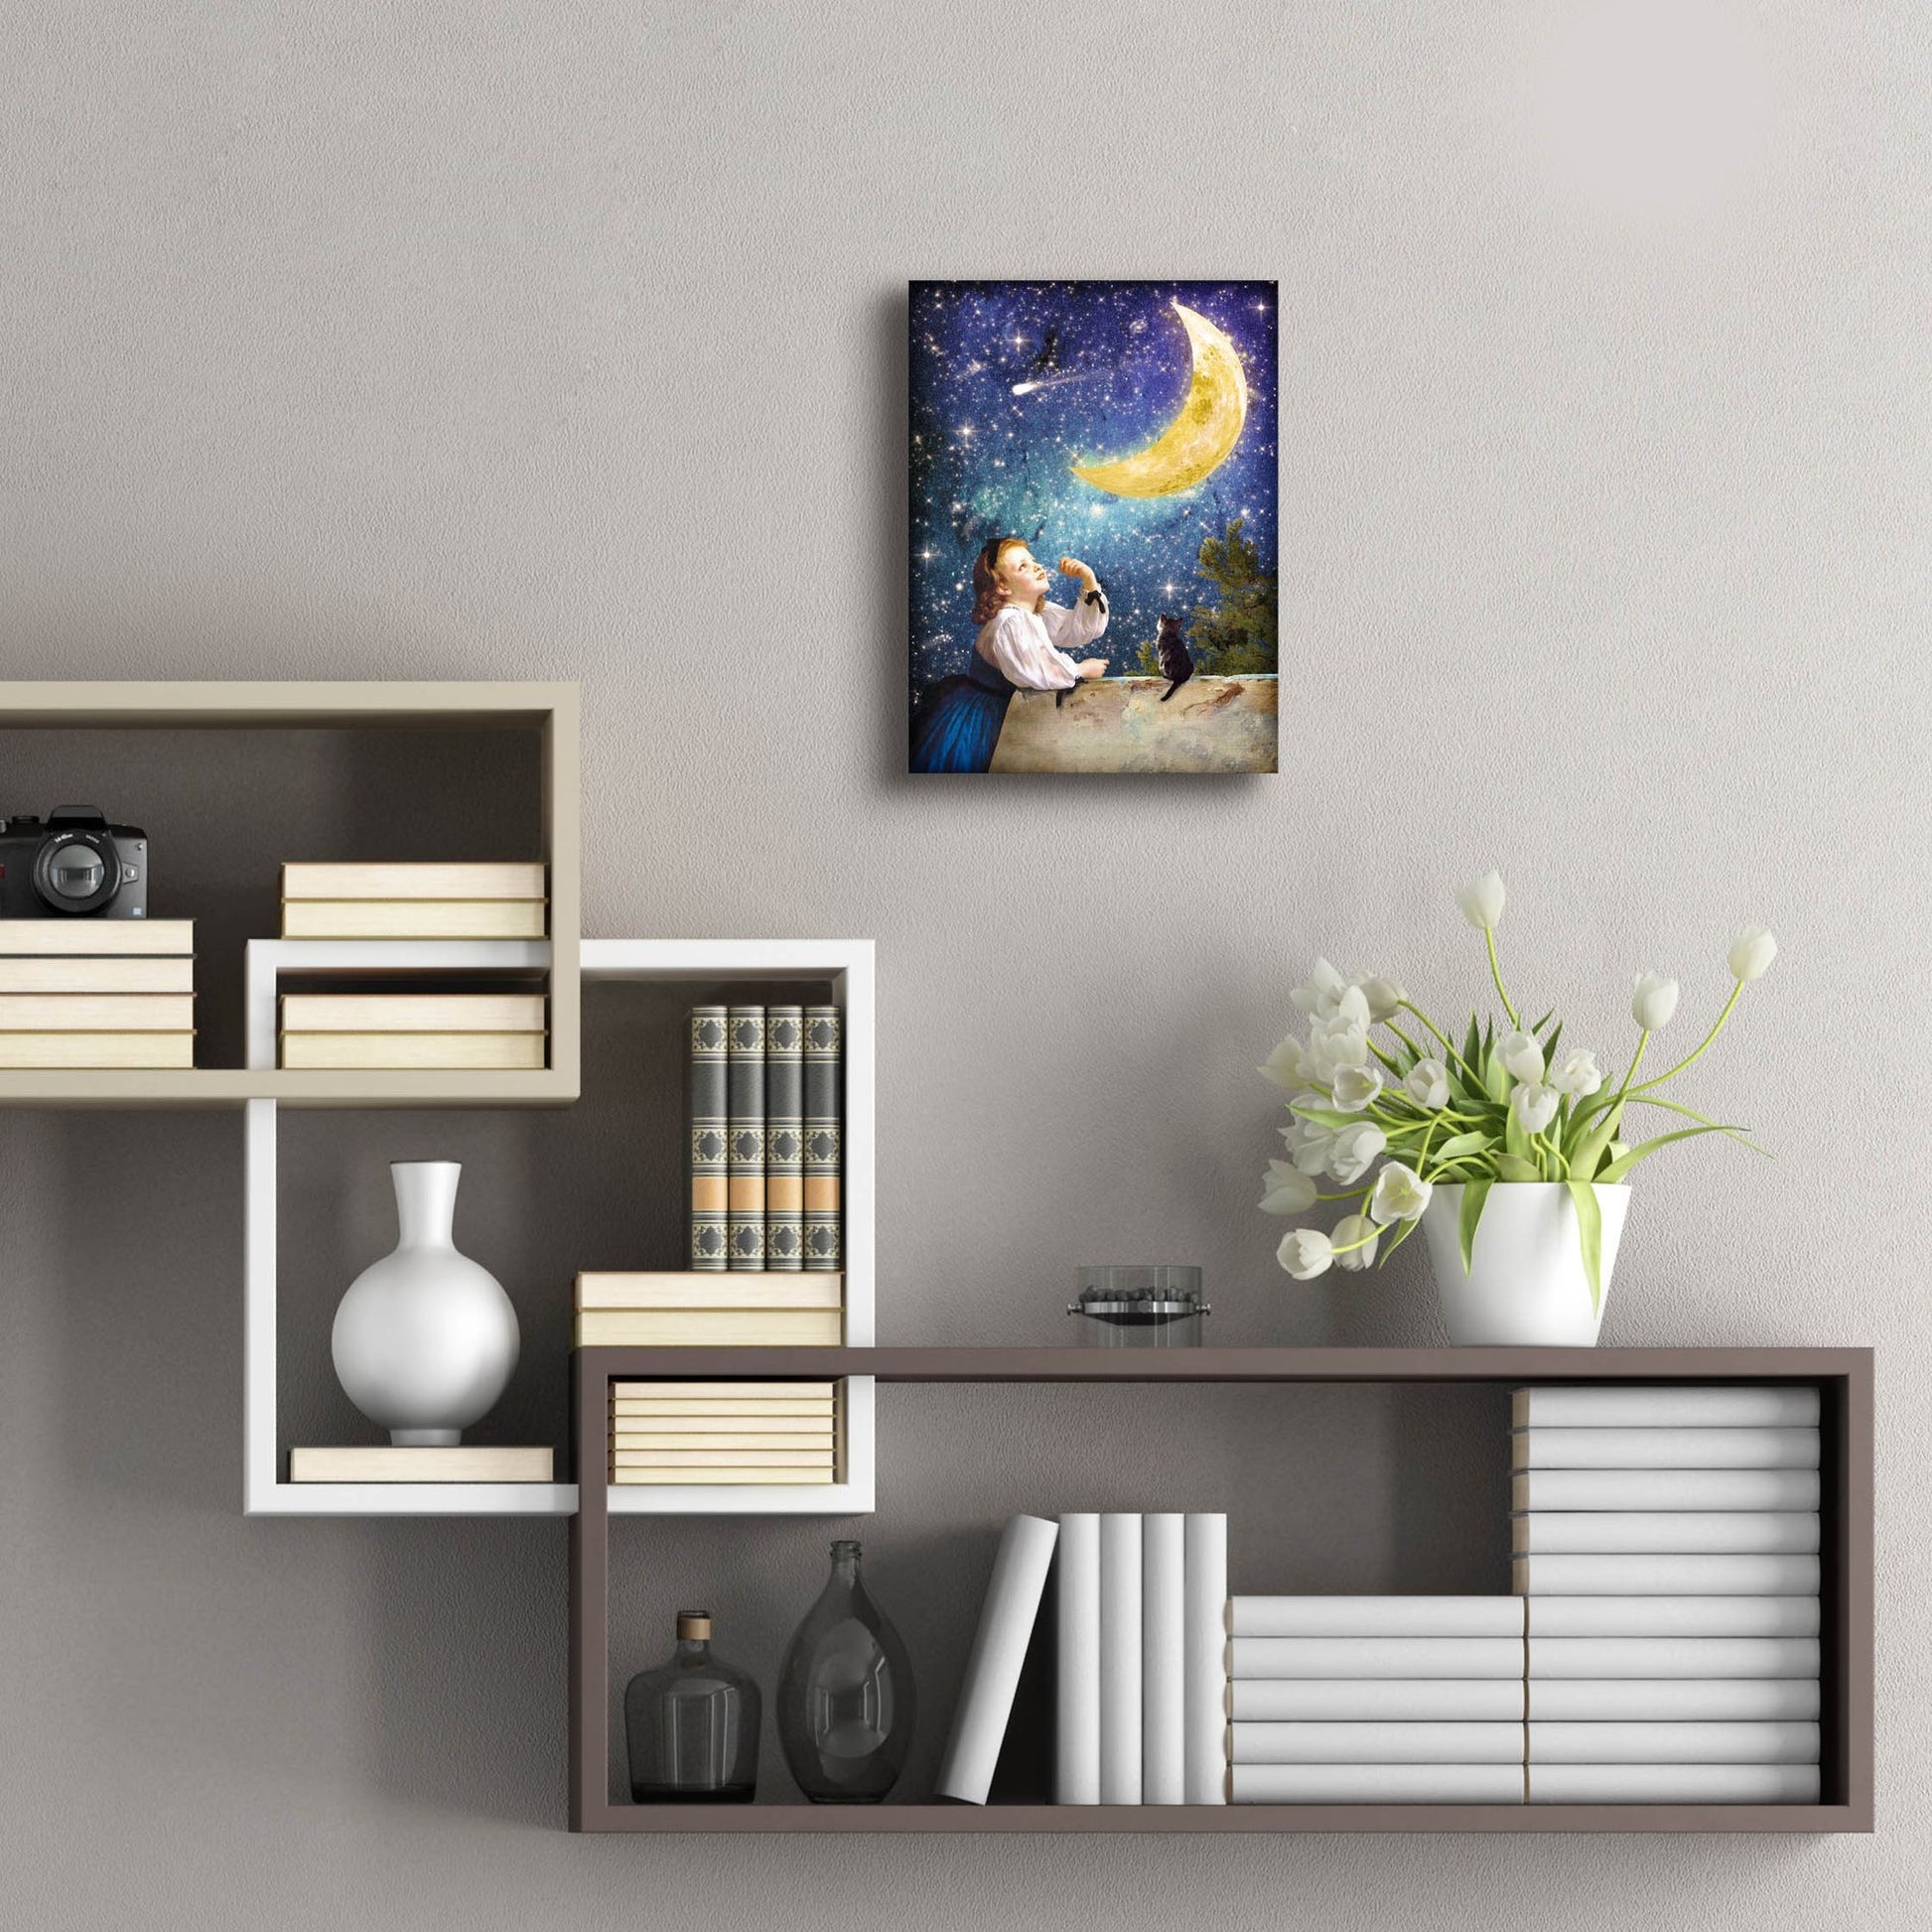 Epic Art 'One Wish Upon the Moon' by Diogo Verissimo, Acrylic Glass Wall Art,12x16